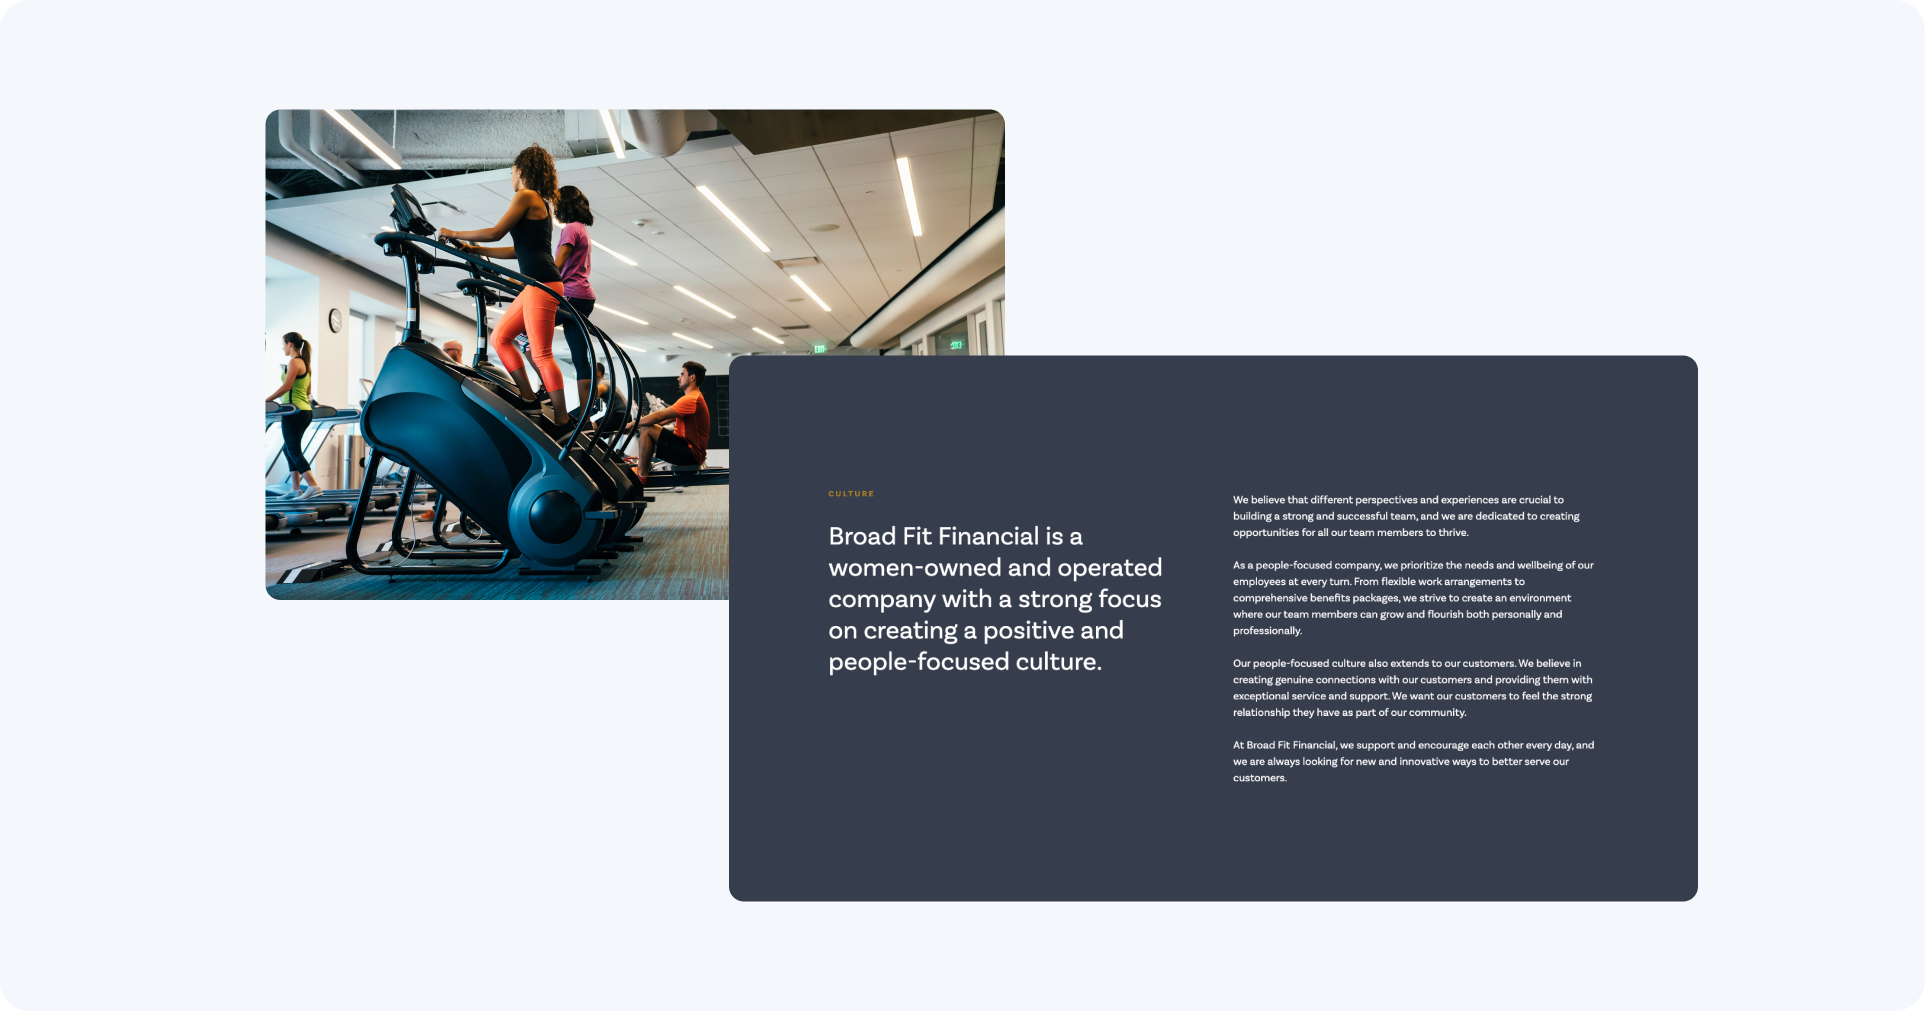 Website module with description of the company and image showing people exercising. 